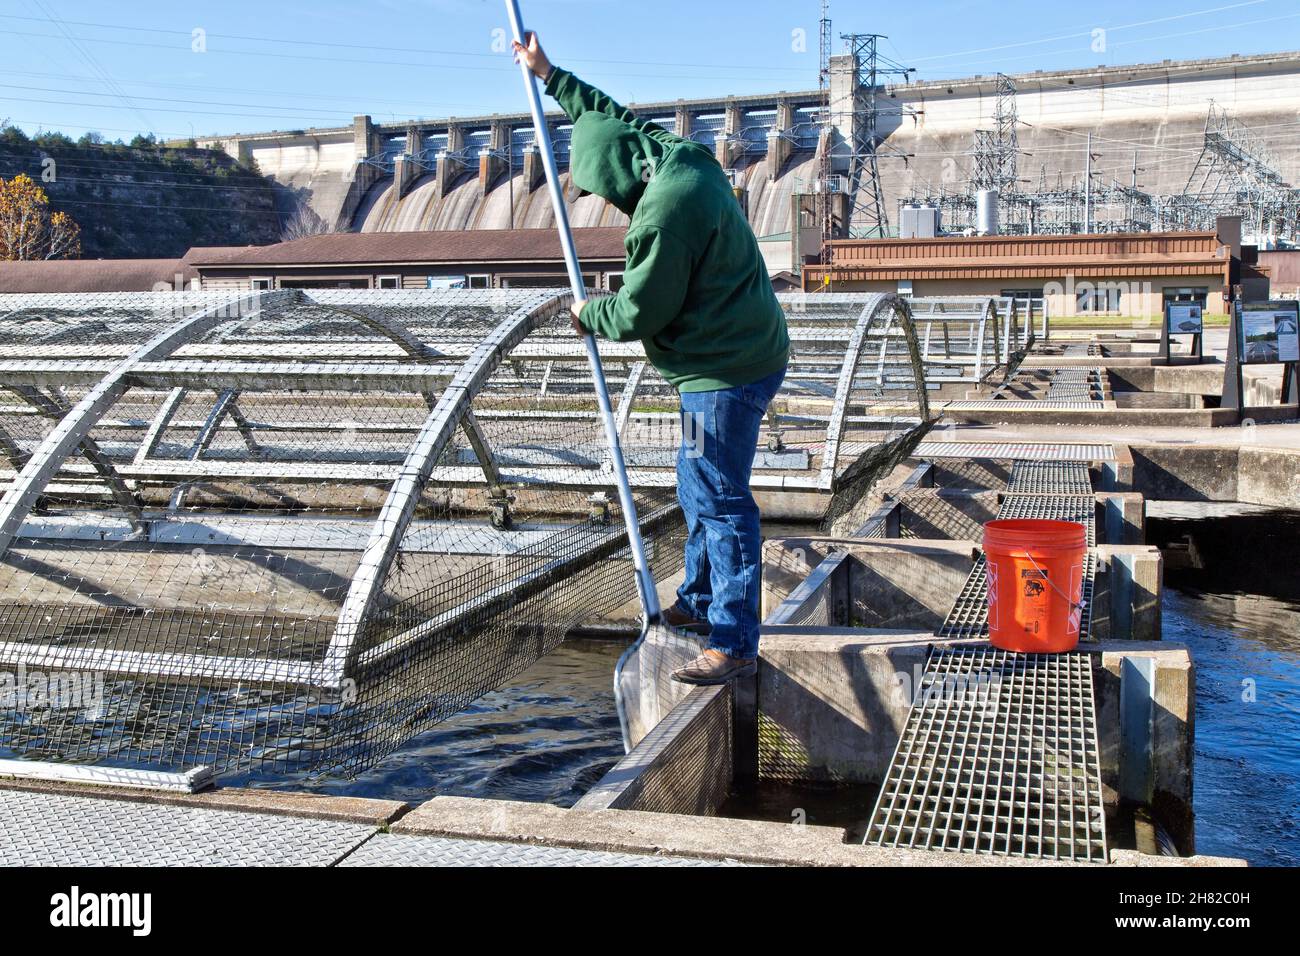 Technician cleaning, removing dead fingerlings from raceway, Shepherd of the Hills Fish Hatchery, Conservation Center. Stock Photo